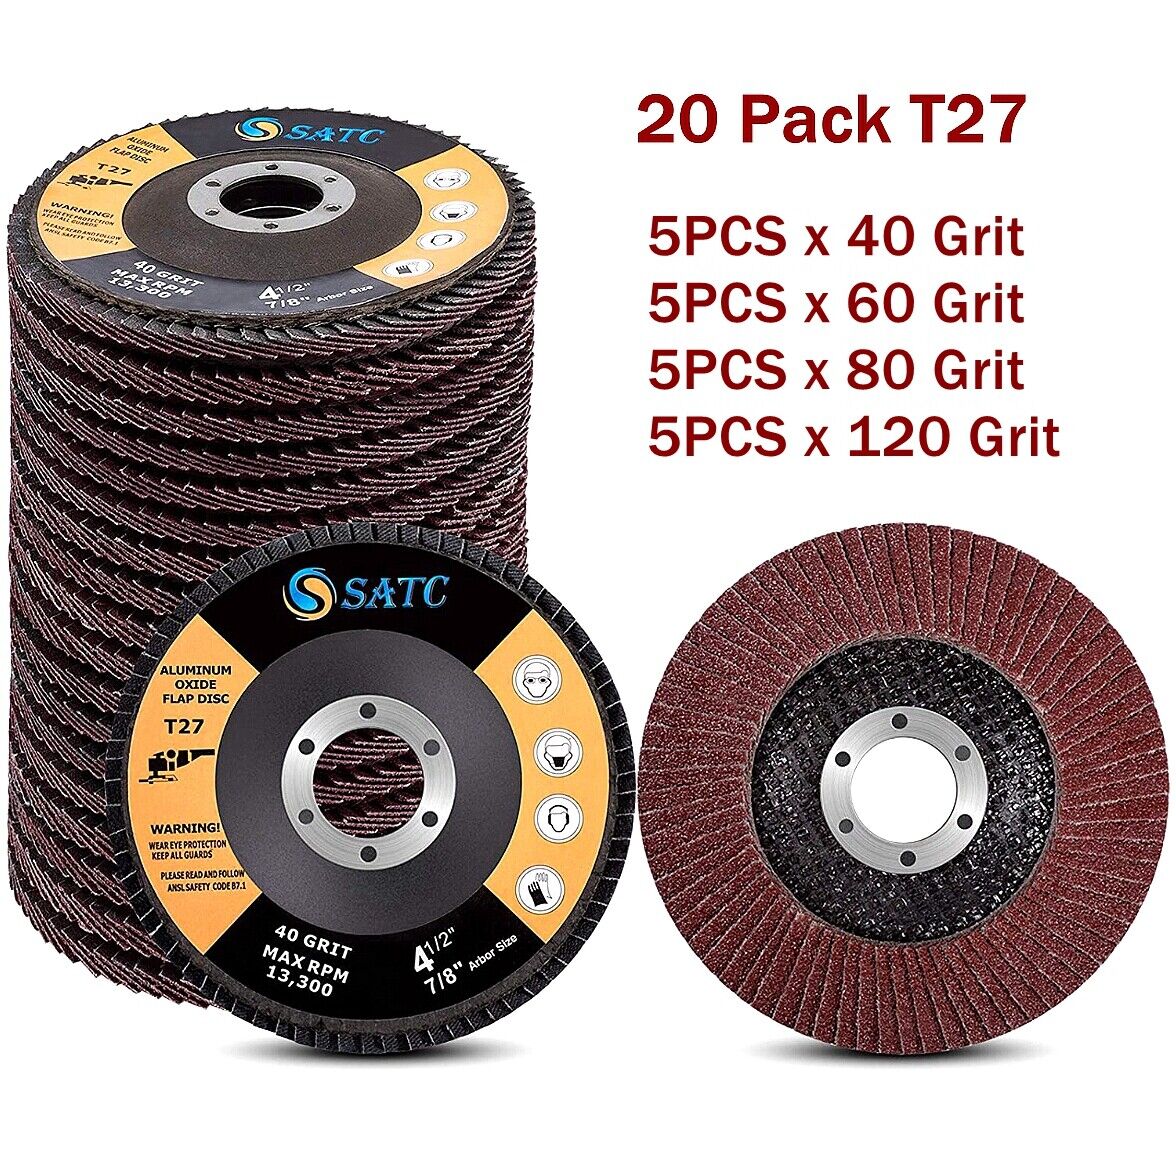 20x 4.5" 4-1/2 Flap Disc 40 60 80 120 Grit Angle Grinder Sanding Grinding Wheels Satc Does Not Apply